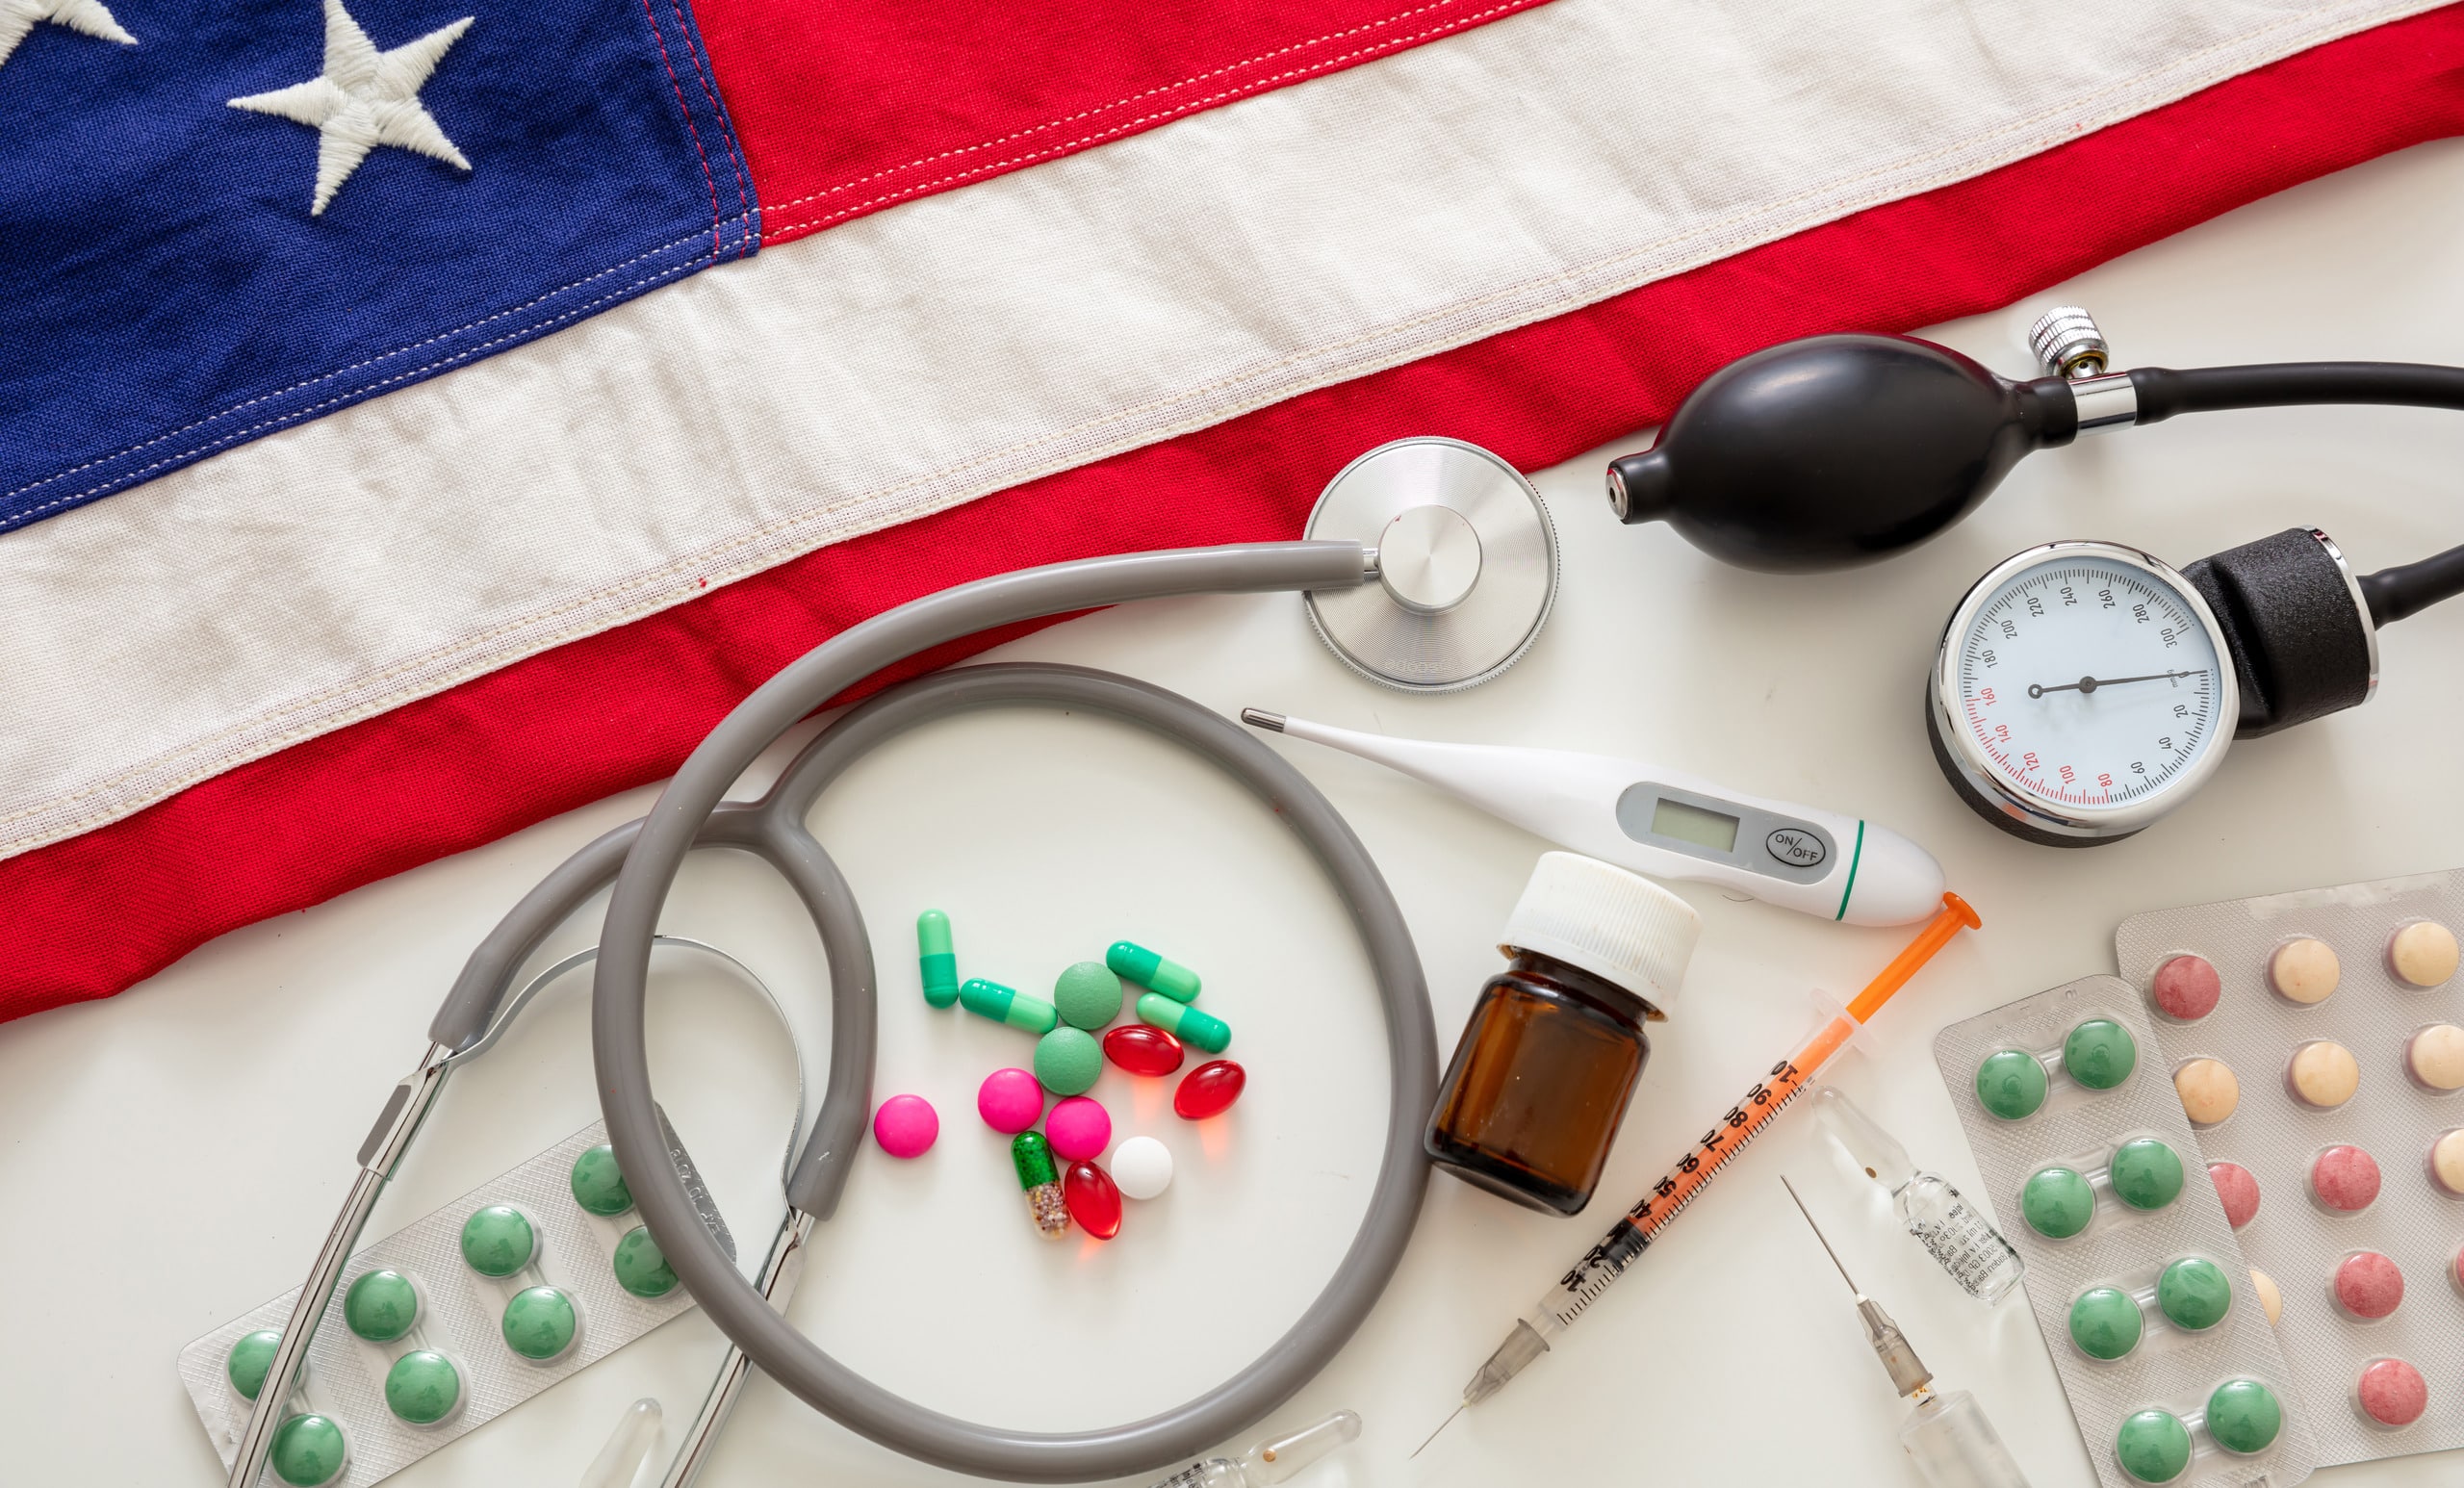 An American flag with a stethoscope, symbolizing America's stance on health care reform.